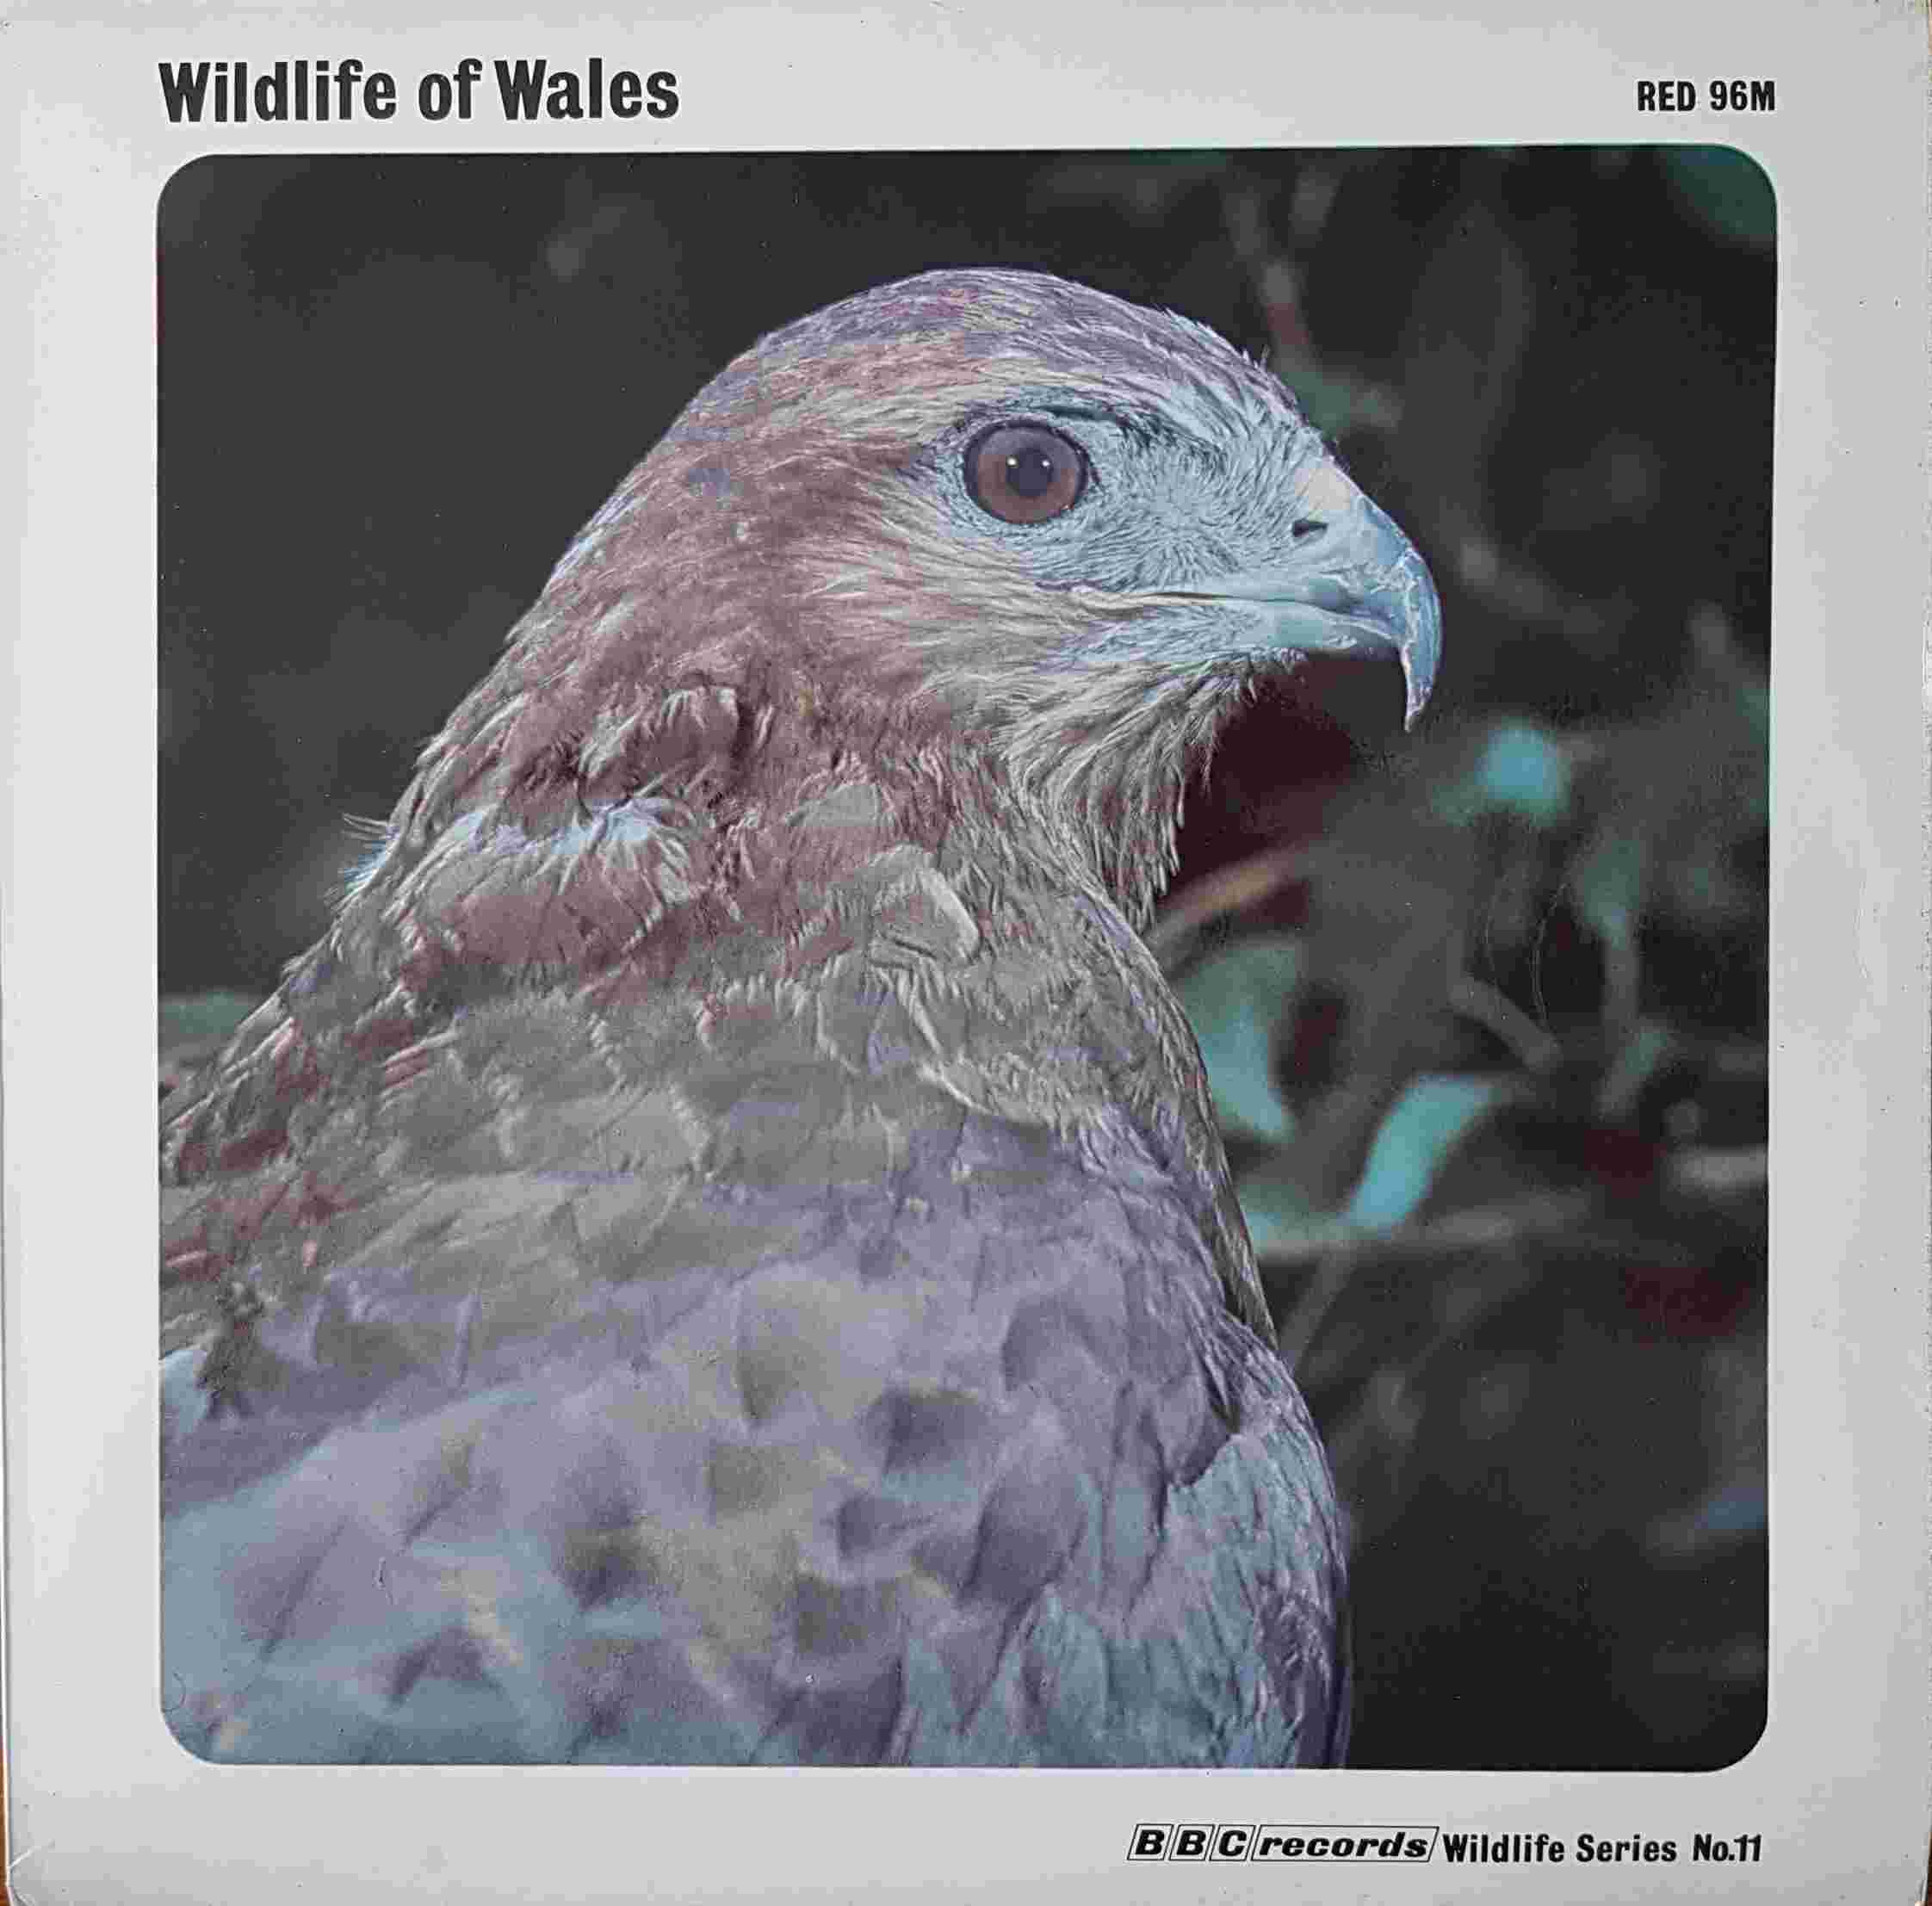 Picture of RED 96 Wildlife of Wales by artist Various from the BBC albums - Records and Tapes library